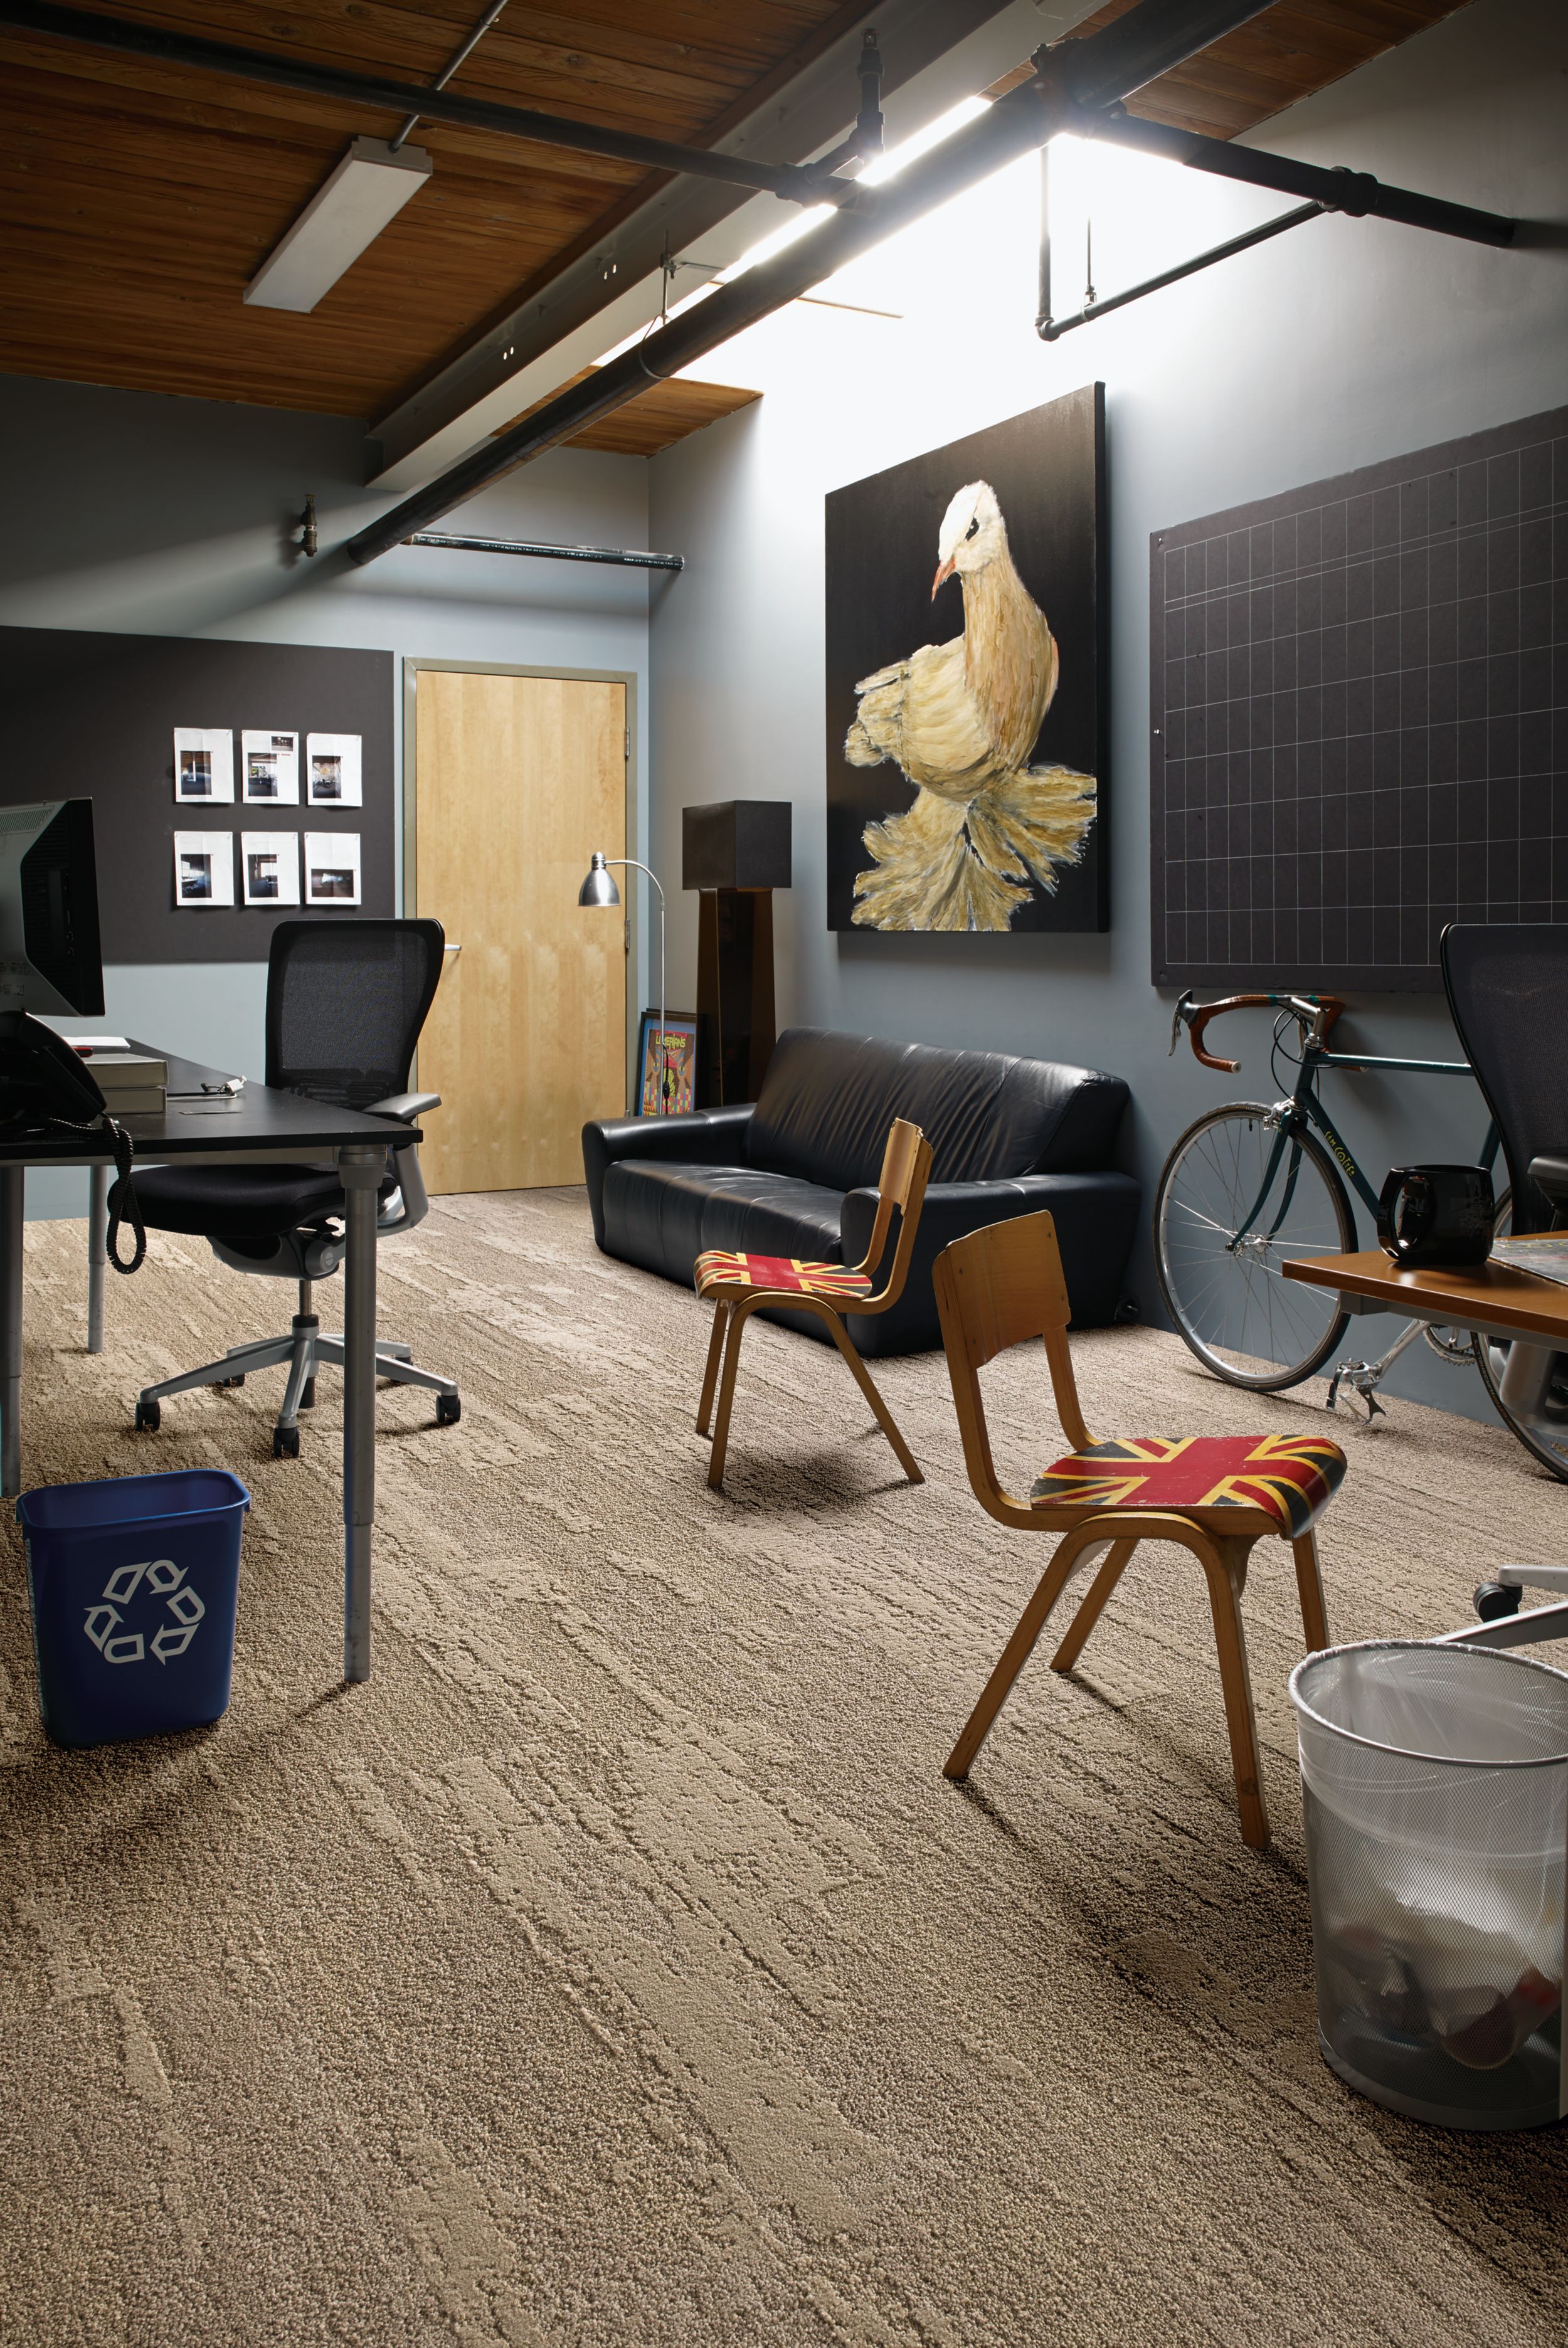 Interface NF401 plank carpet tile in private office space with bird artwork and no windows Bildnummer 12